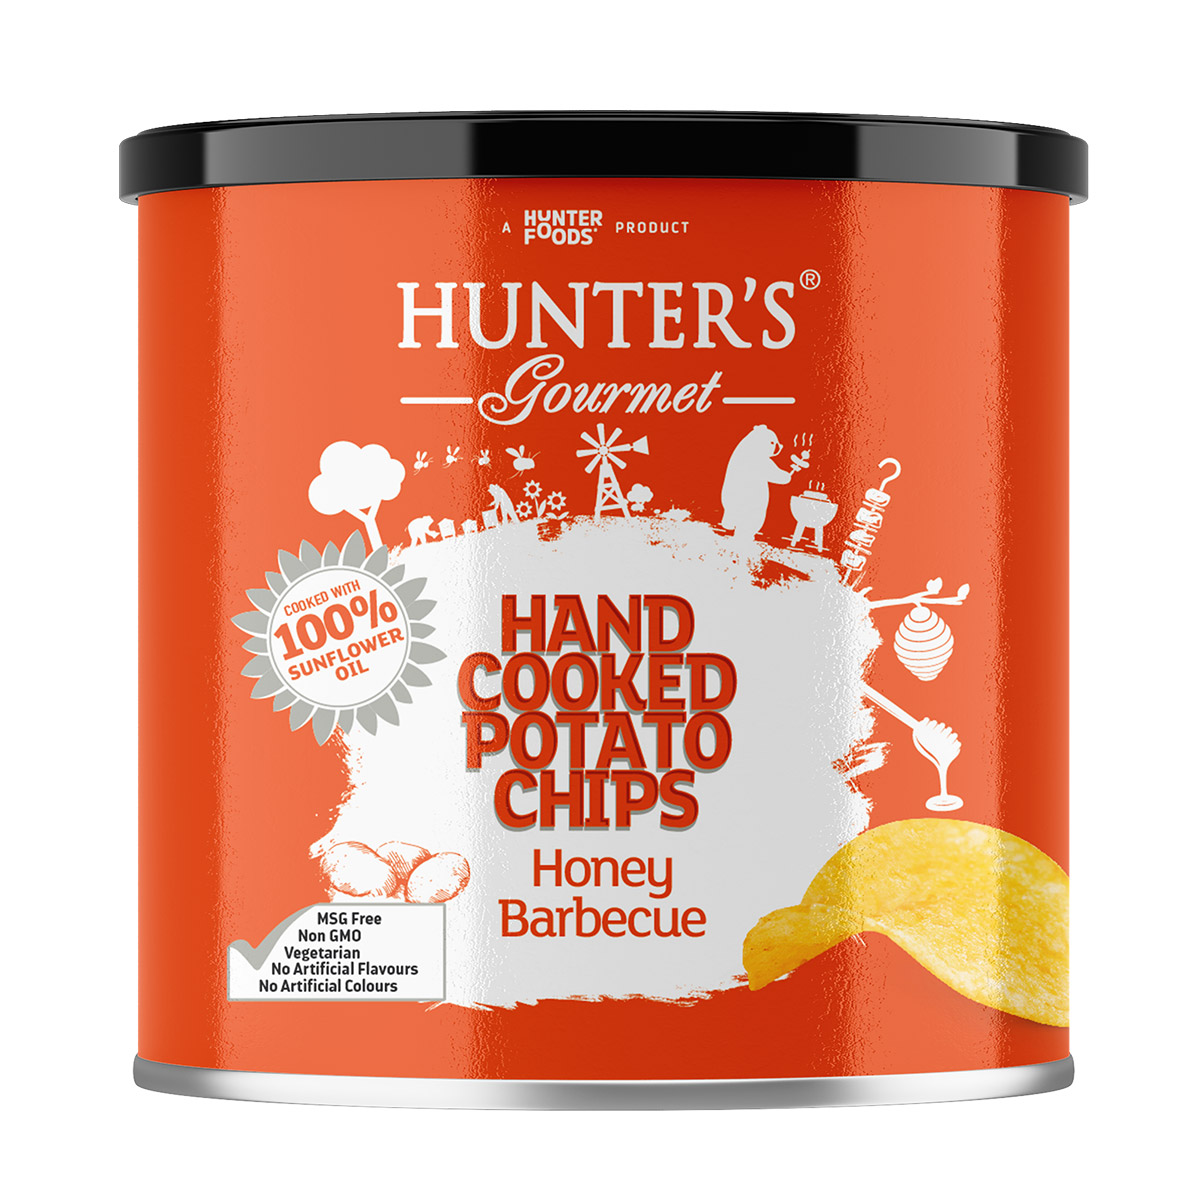 Hunter's Gourmet Hand Cooked Potato Chips Honey Barbecue 50 units per case 40 g